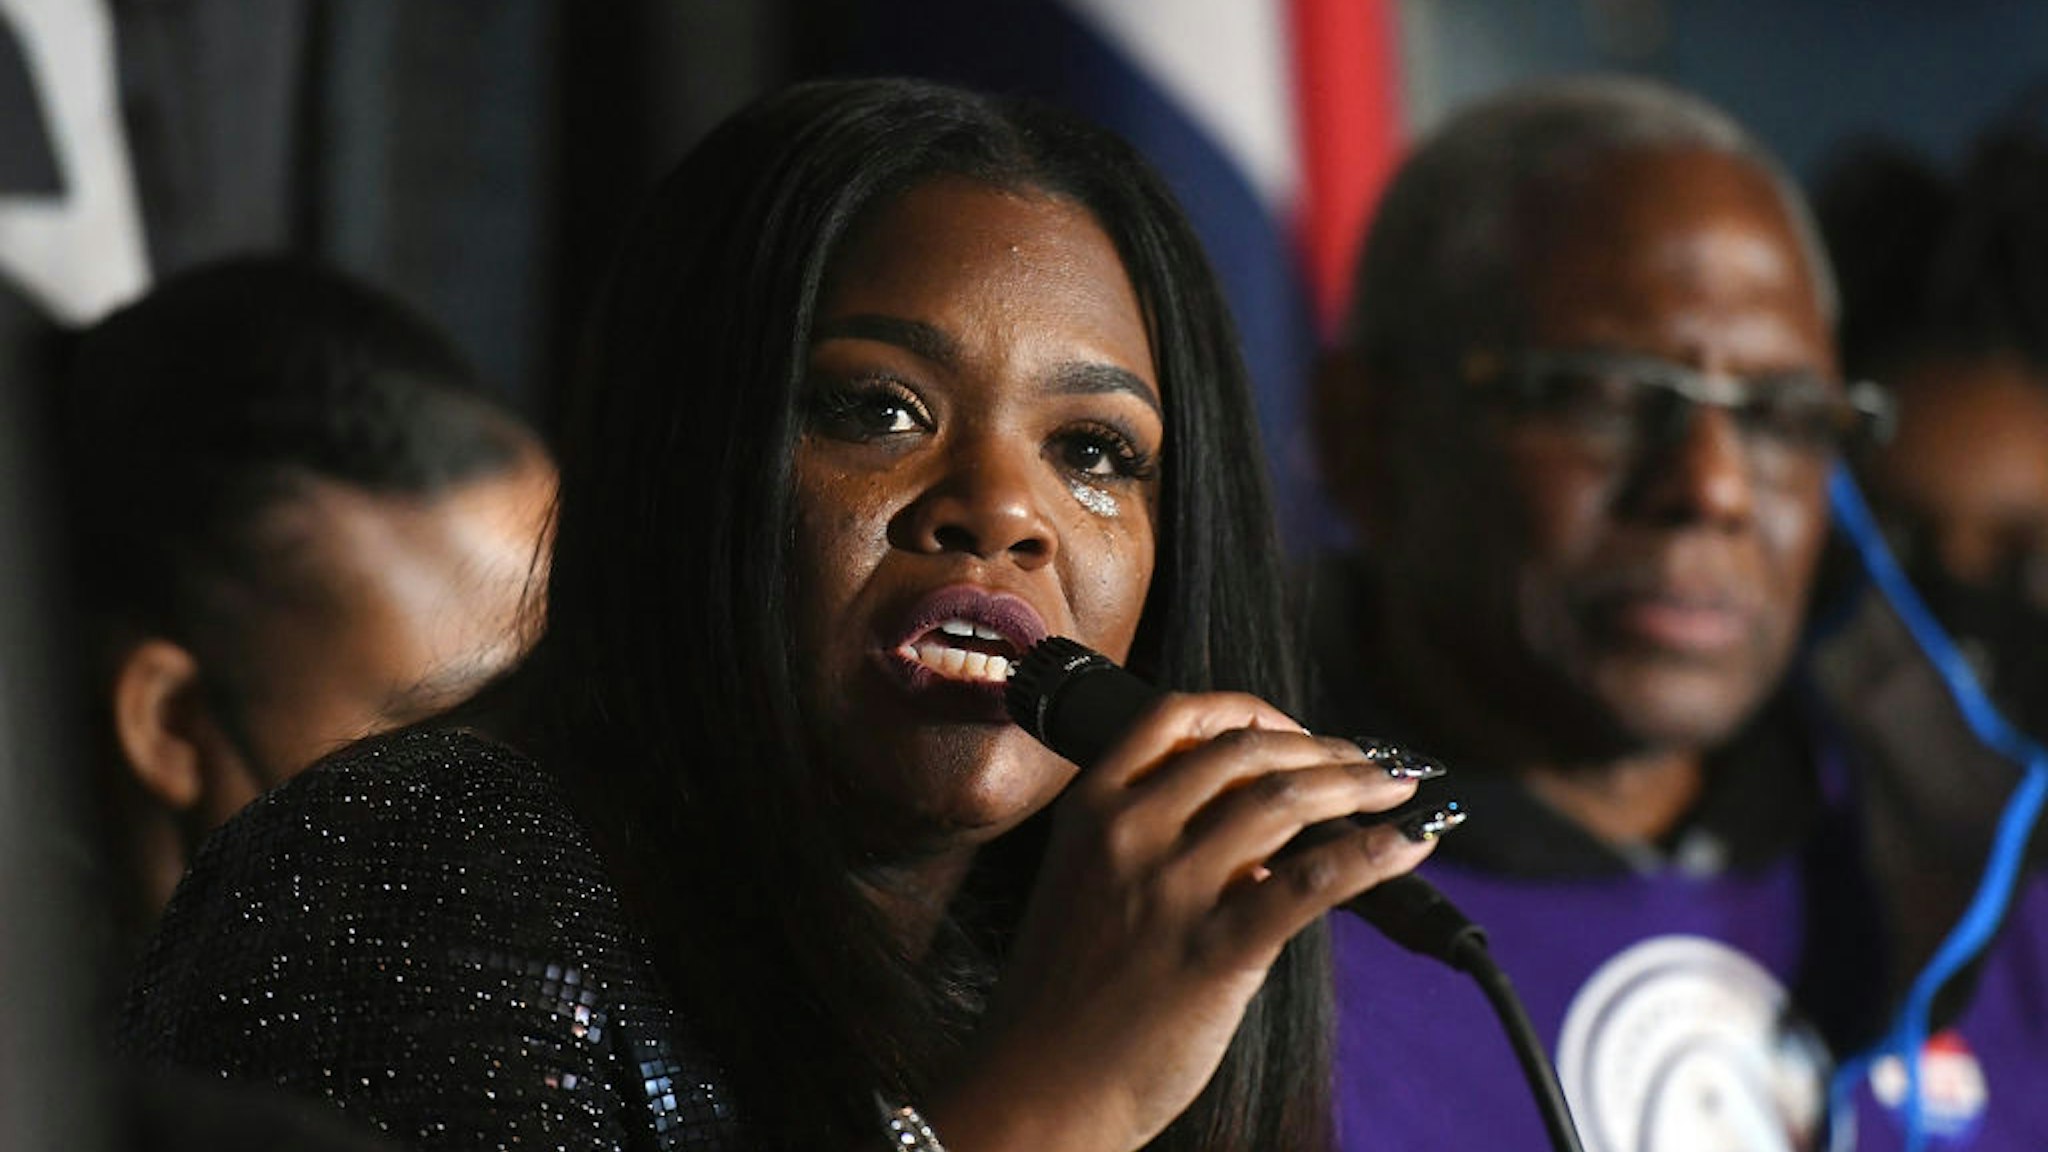 Congresswoman-elect Cori Bush speaks during her election-night watch party on November 3, 2020 at campaign headquarters in St. Louis, Missouri.